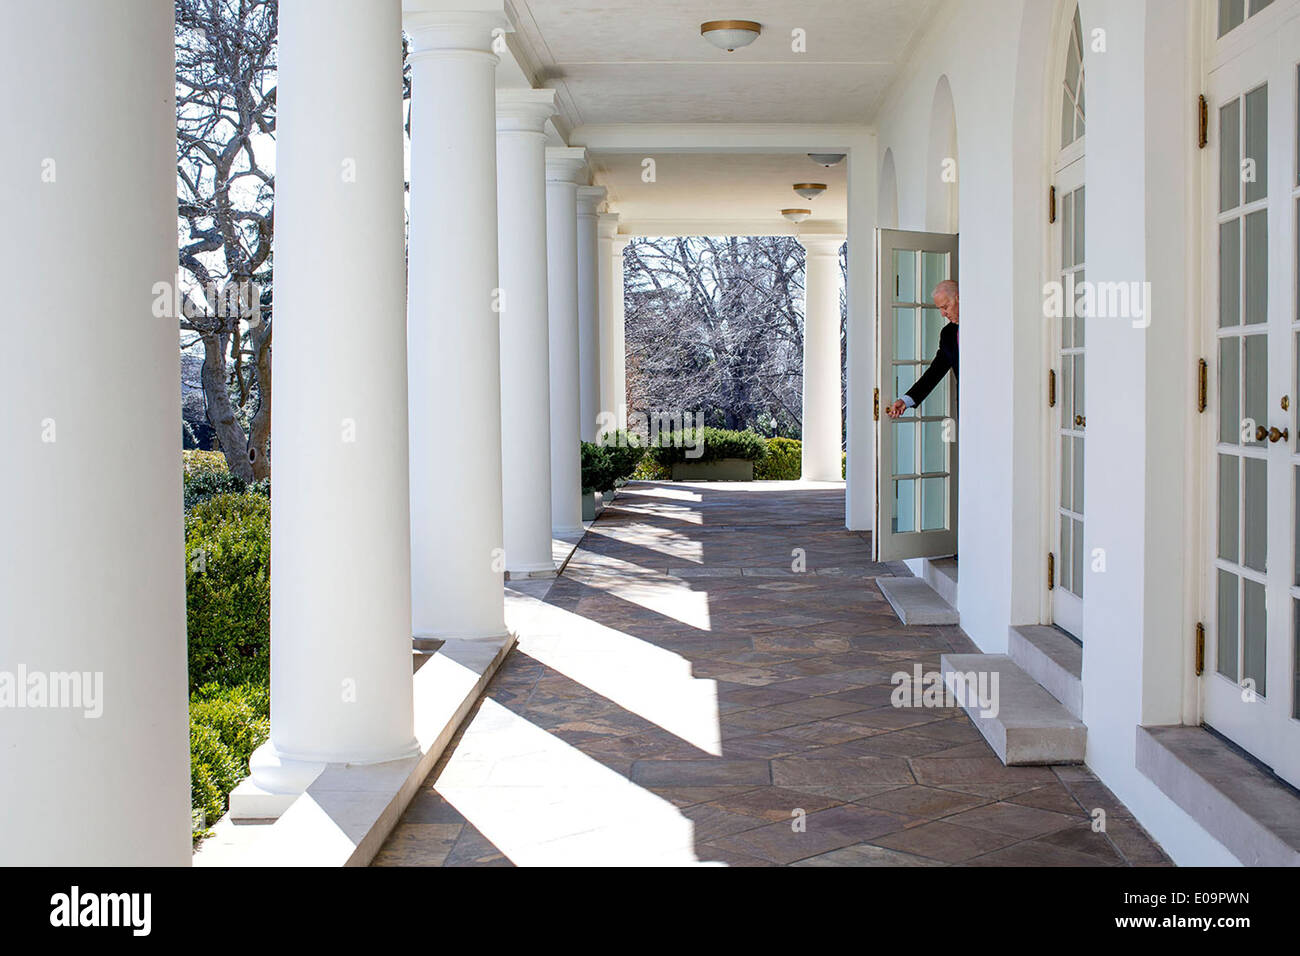 US Vice President Joe Biden opens a door from the Outer Oval Office onto the Colonnade of the White House on his way to a National Governors Association meeting February 24, 2014 in Washington, DC. Stock Photo